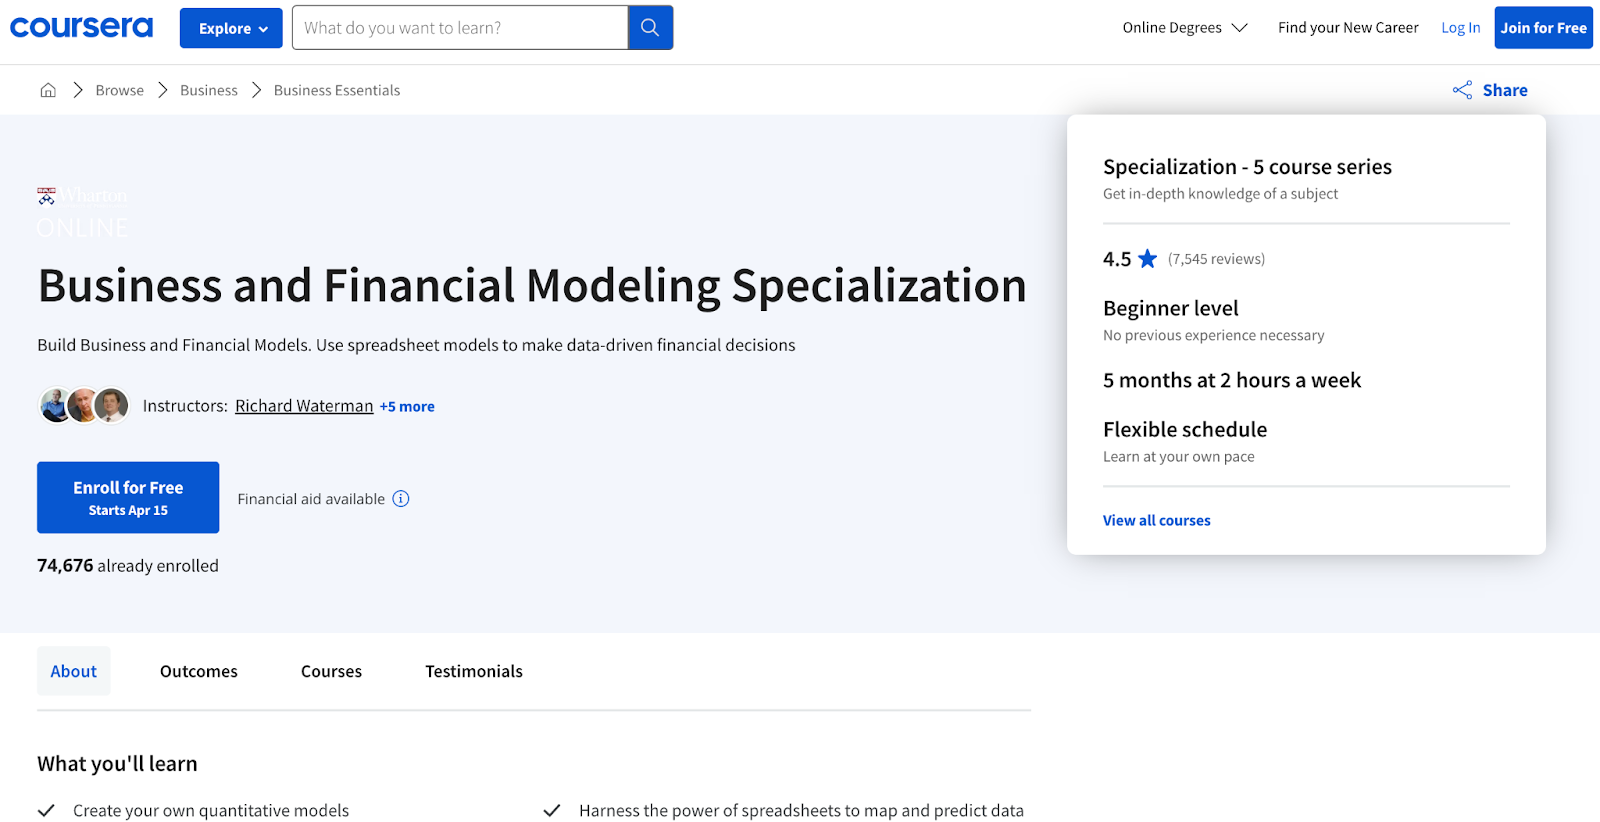 Best Financial Modeling Courses